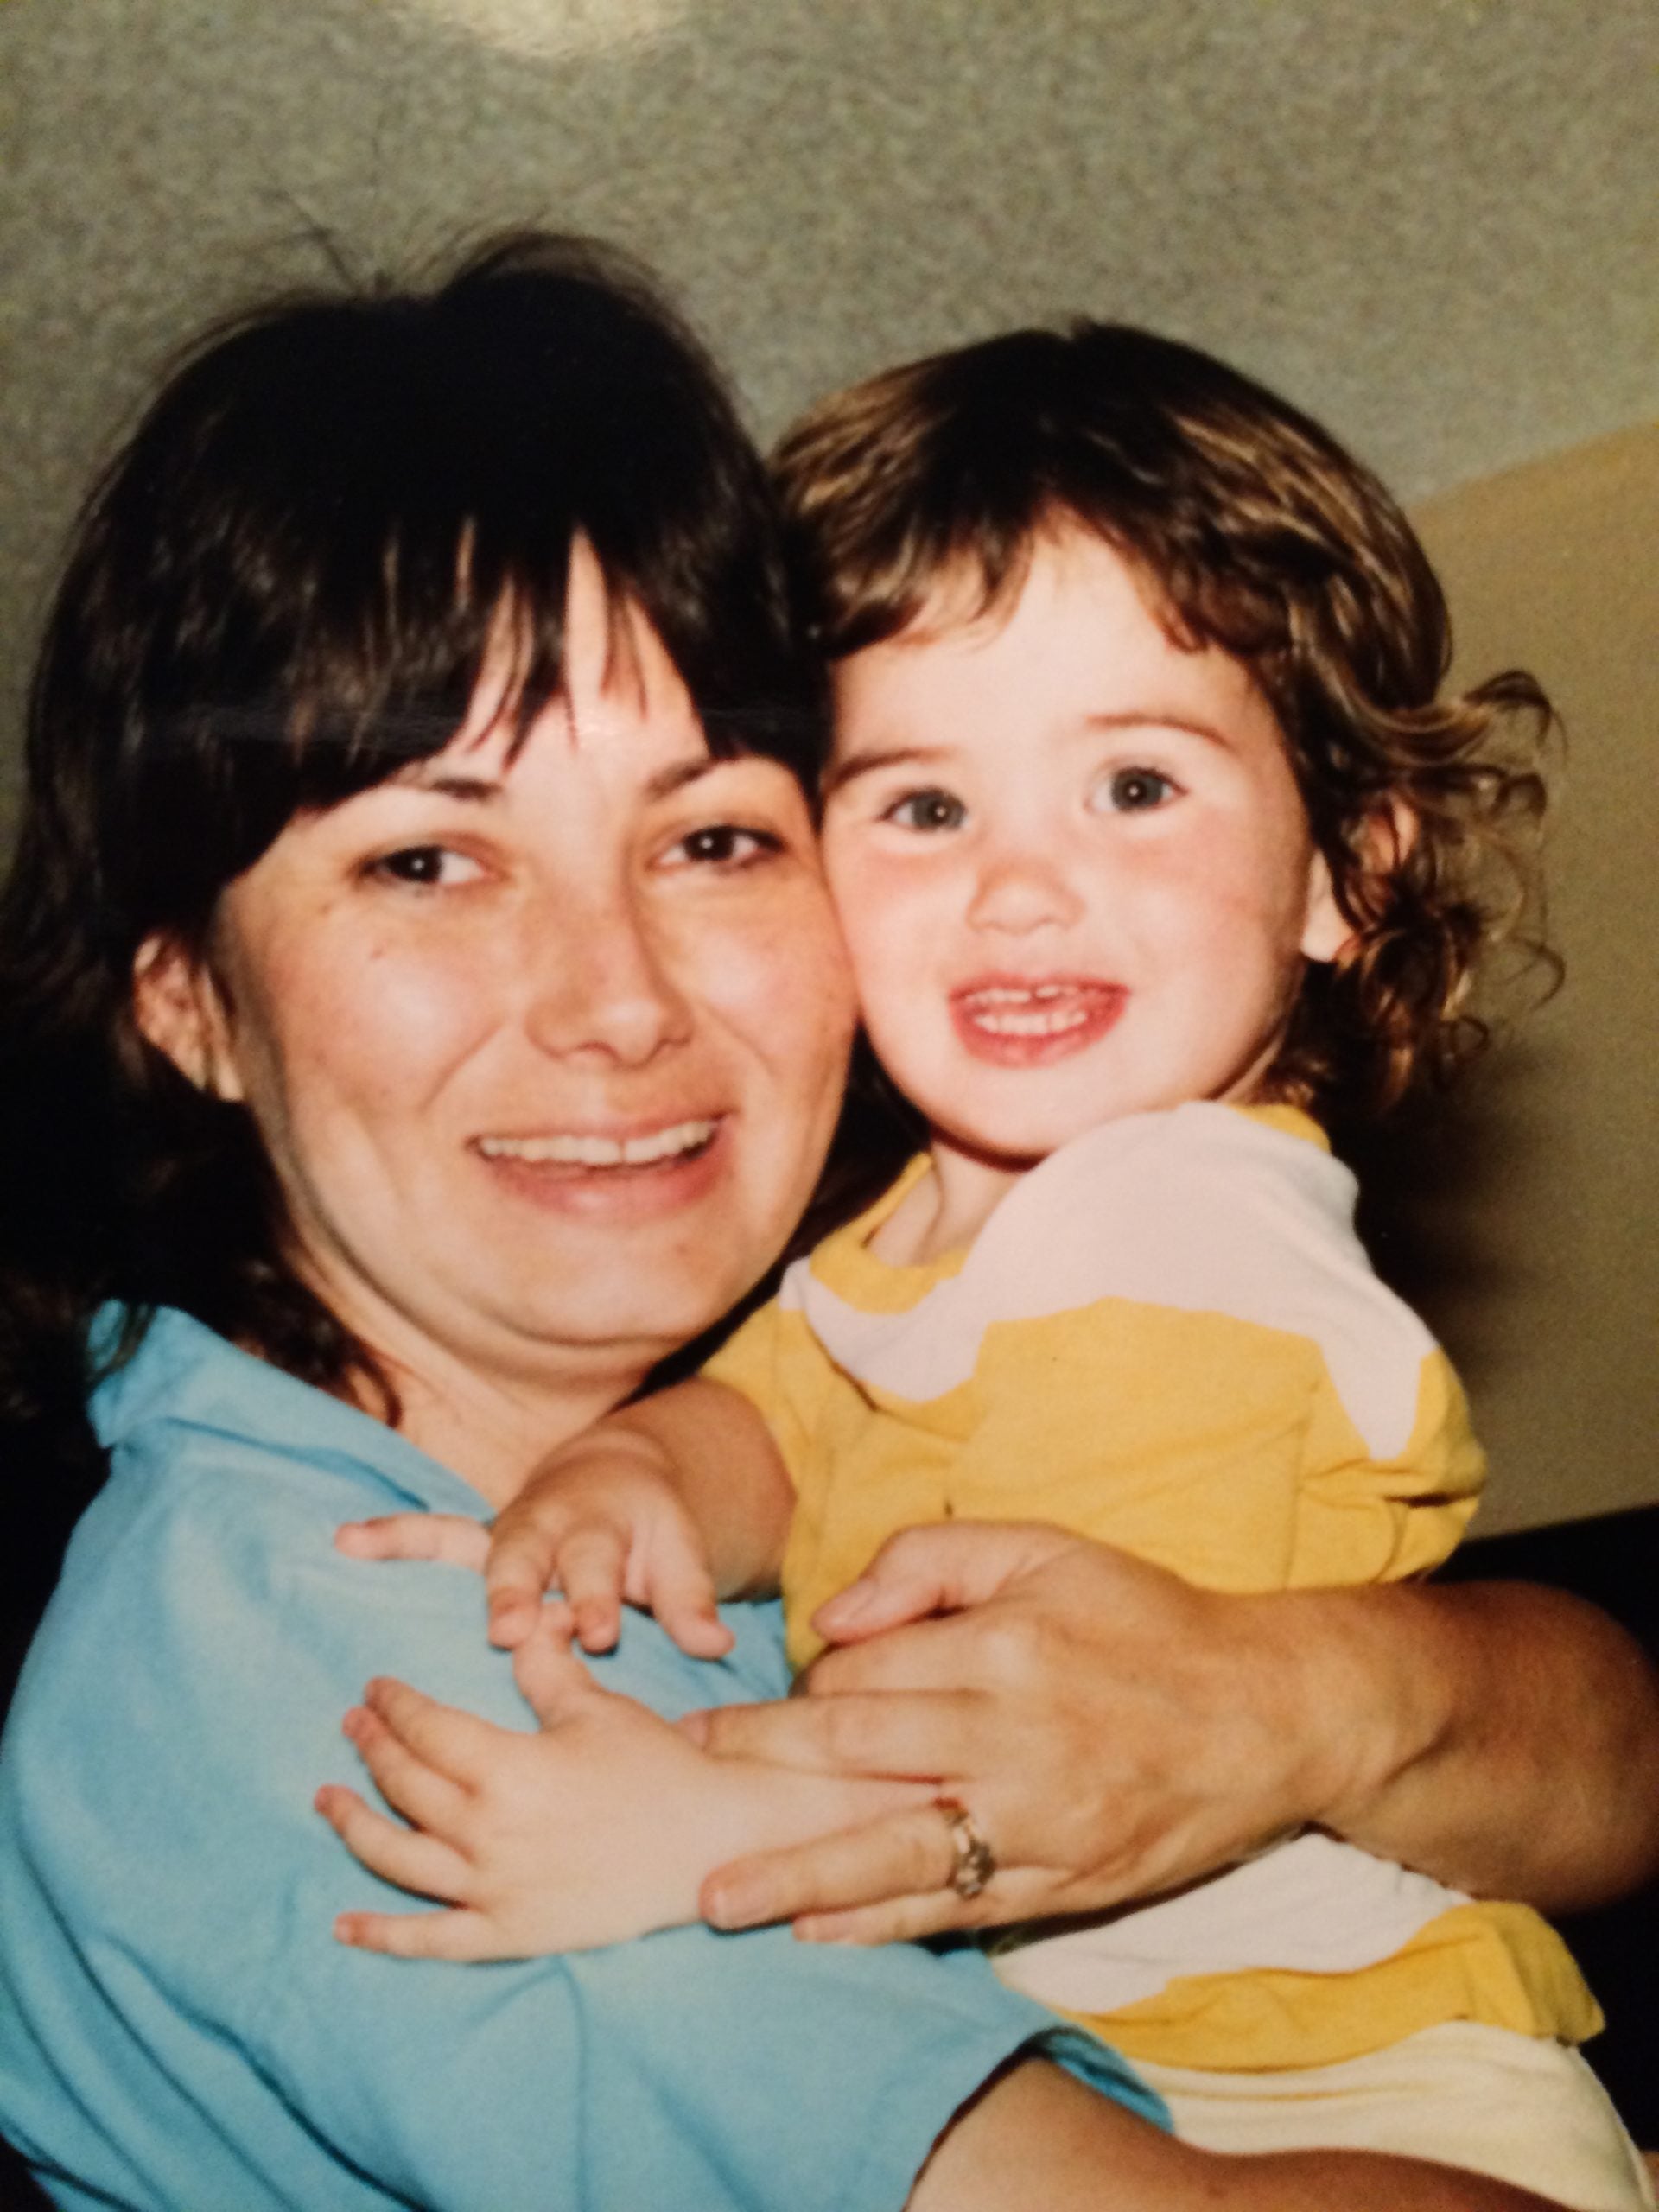 Author as a toddler being held by her mother